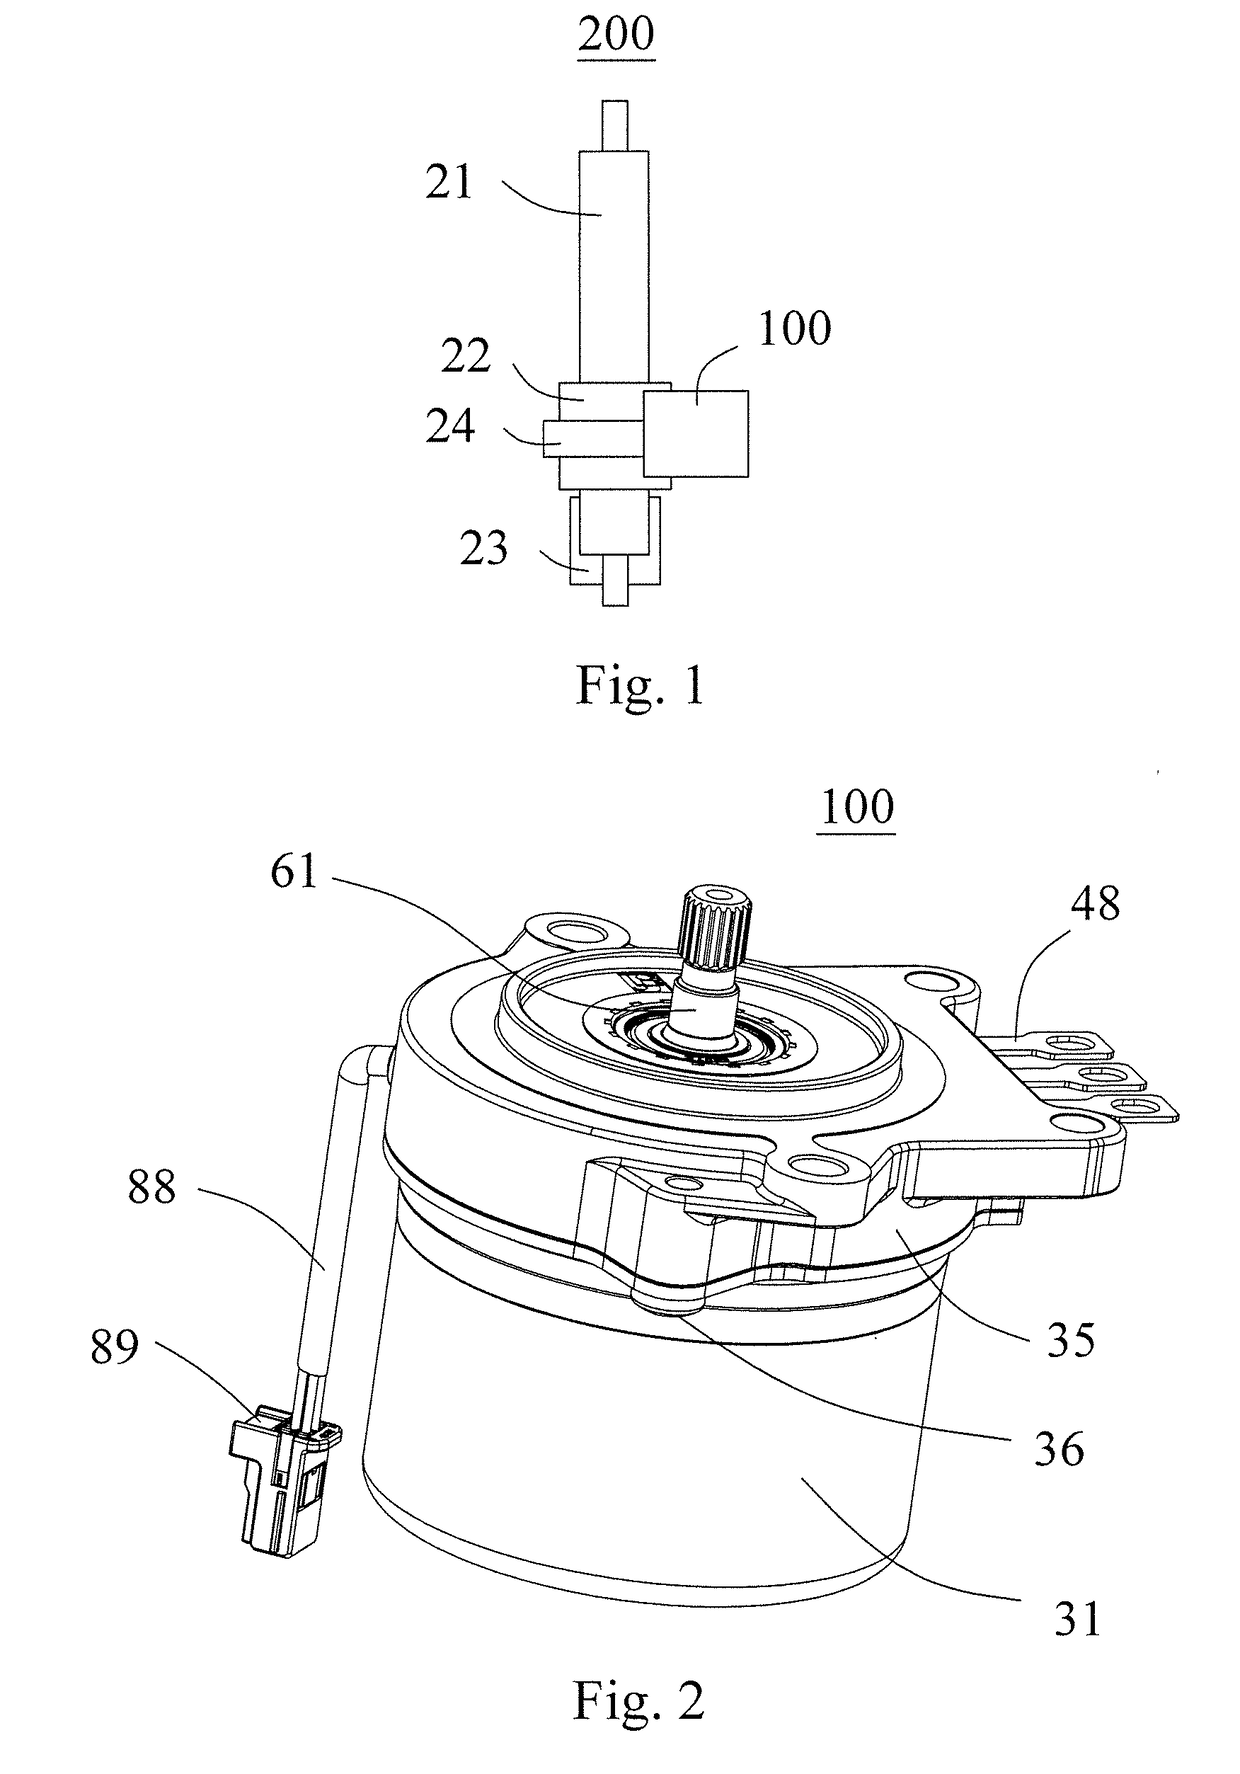 Motor and resolver thereof